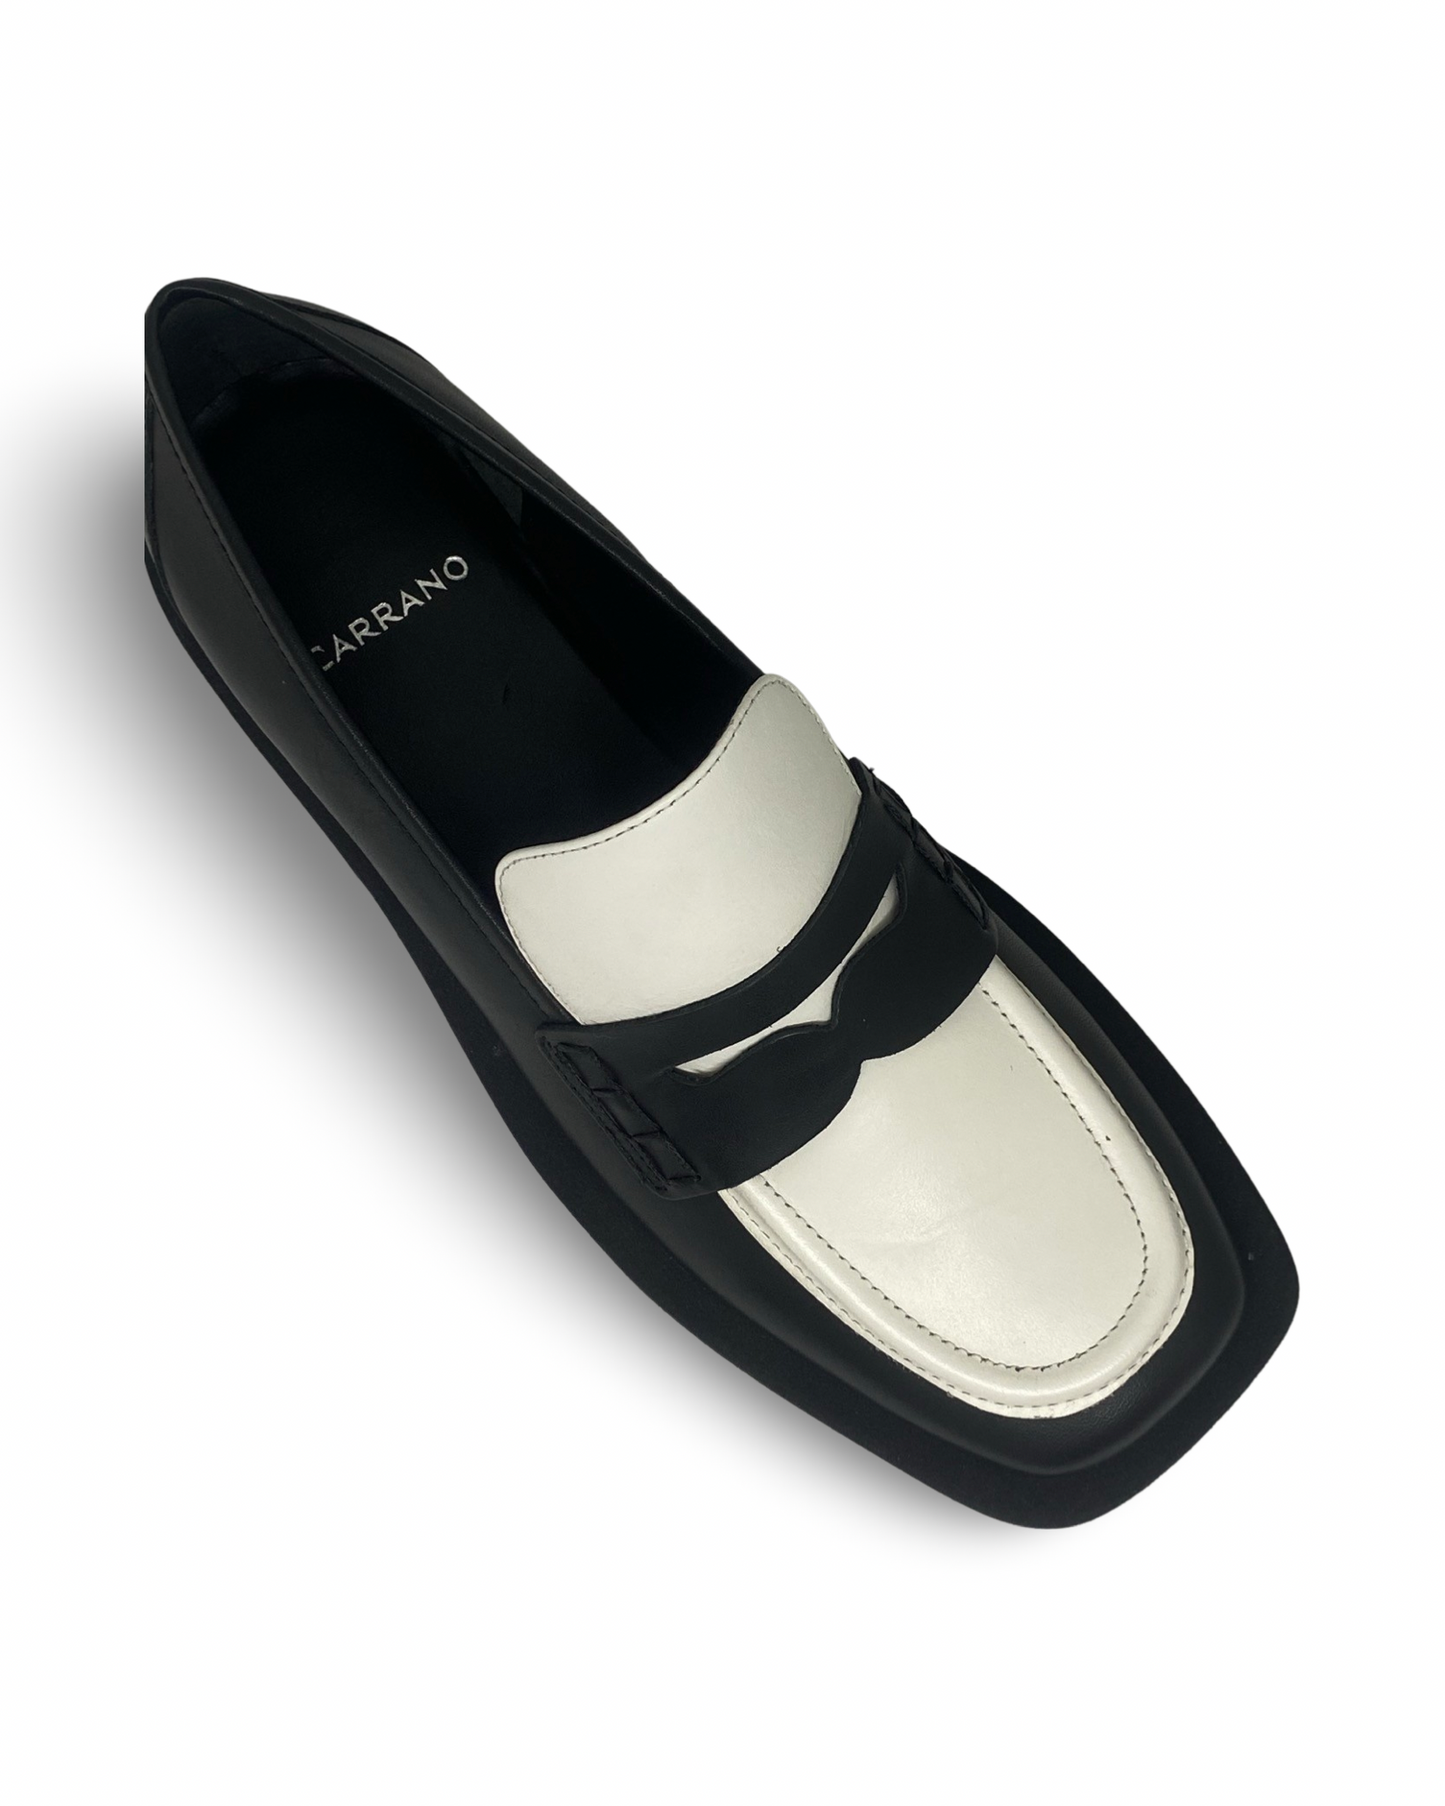 Black & White loafer By Carrano